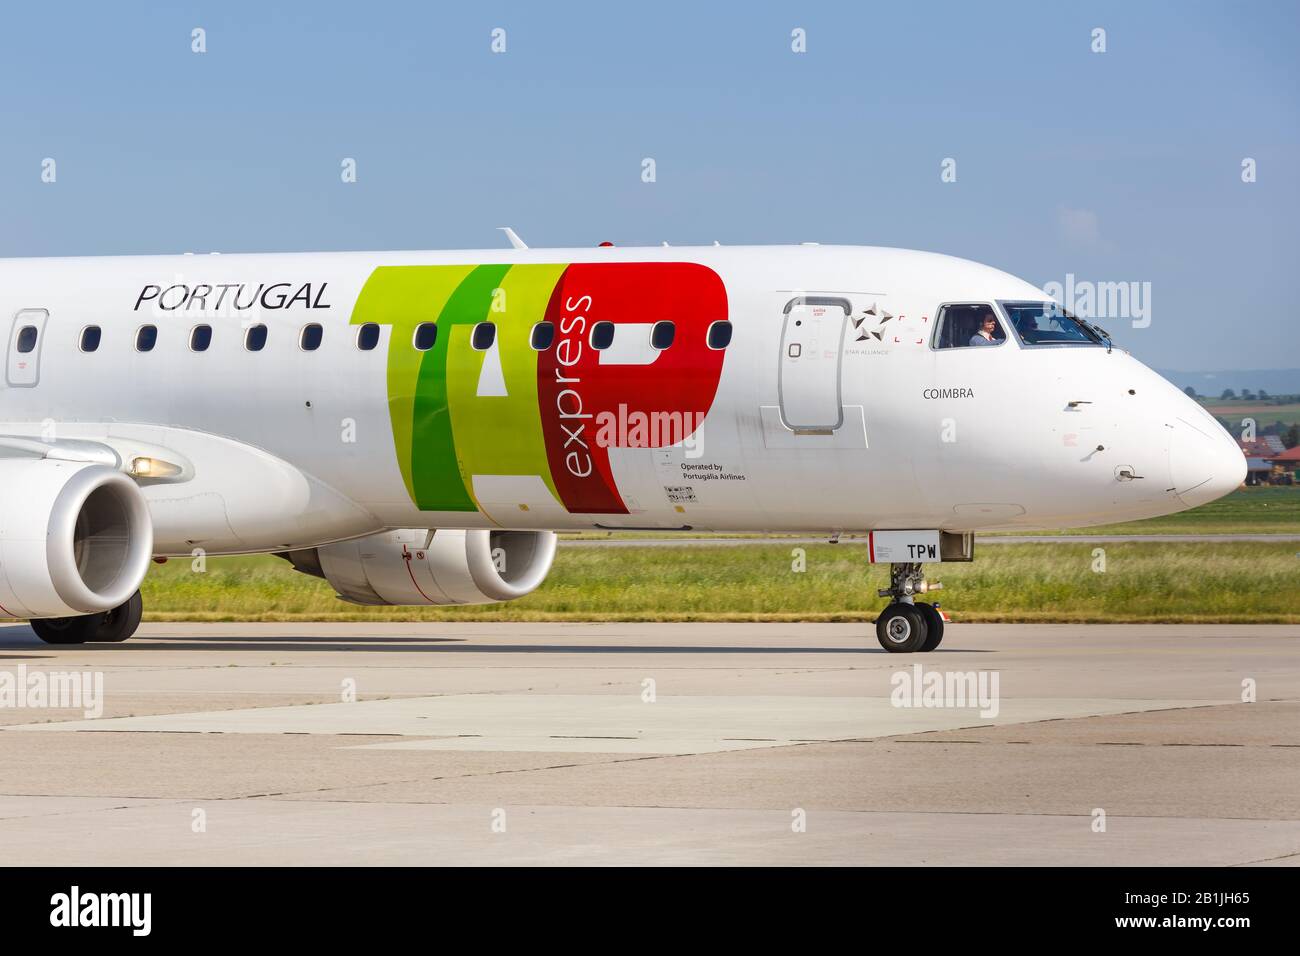 Stuttgart, Germany – May 18, 2018: TAP Portugal Express Embraer 190 airplane at Stuttgart airport (STR) in Germany. Stock Photo